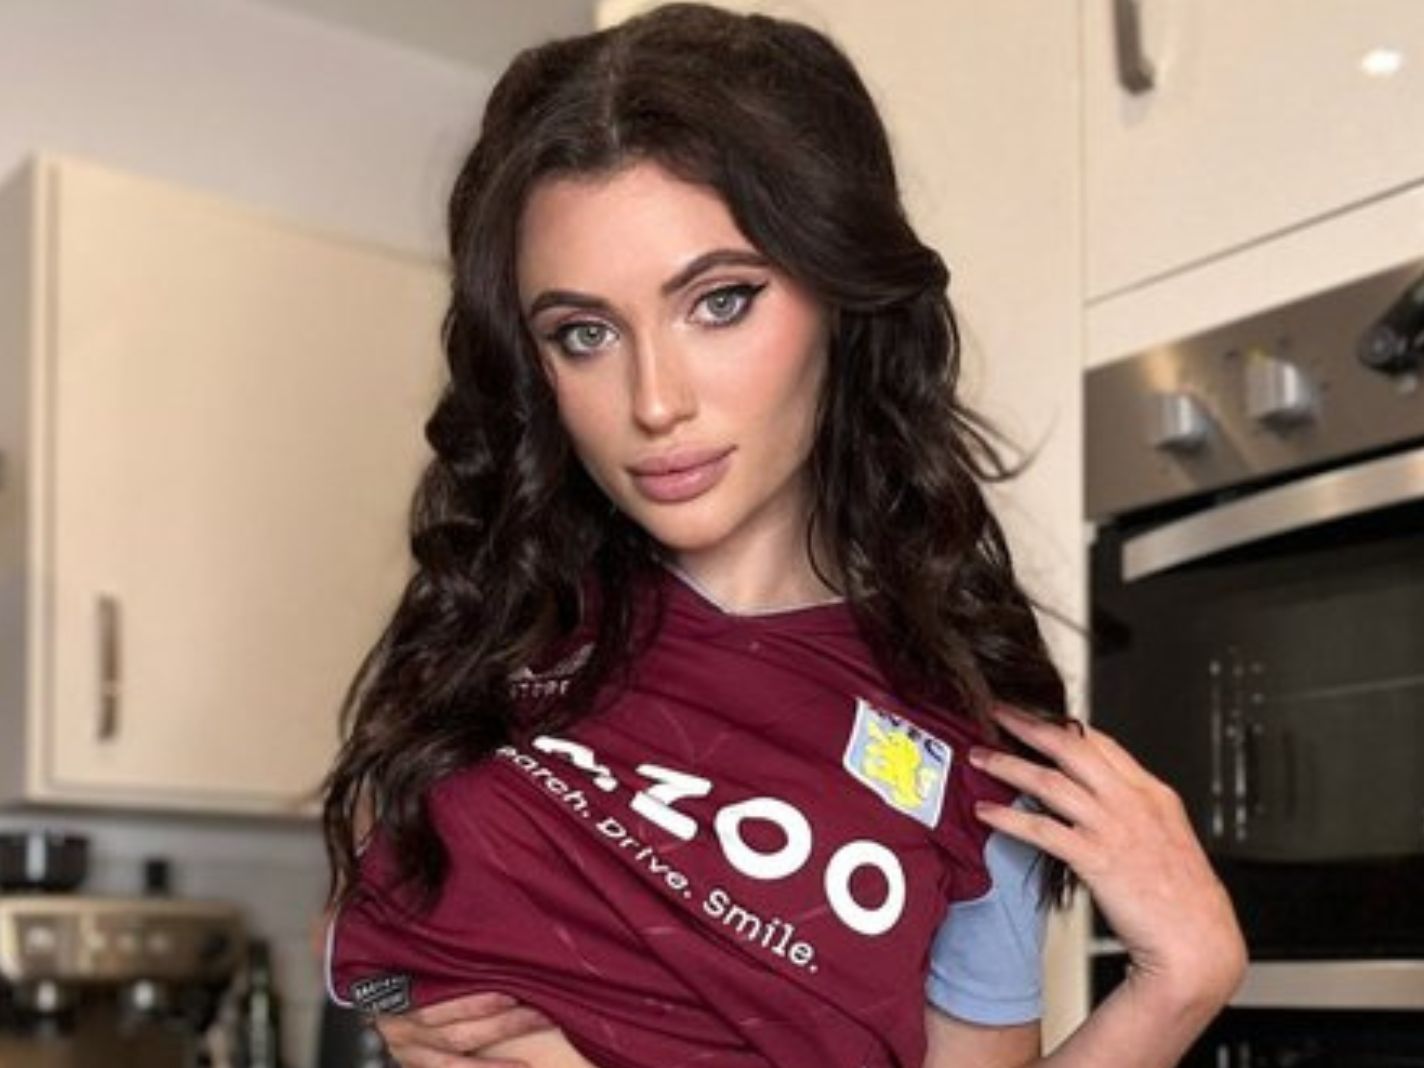 Unfortunately Aston Villa Have an Onlyfans Mascot Now, Too